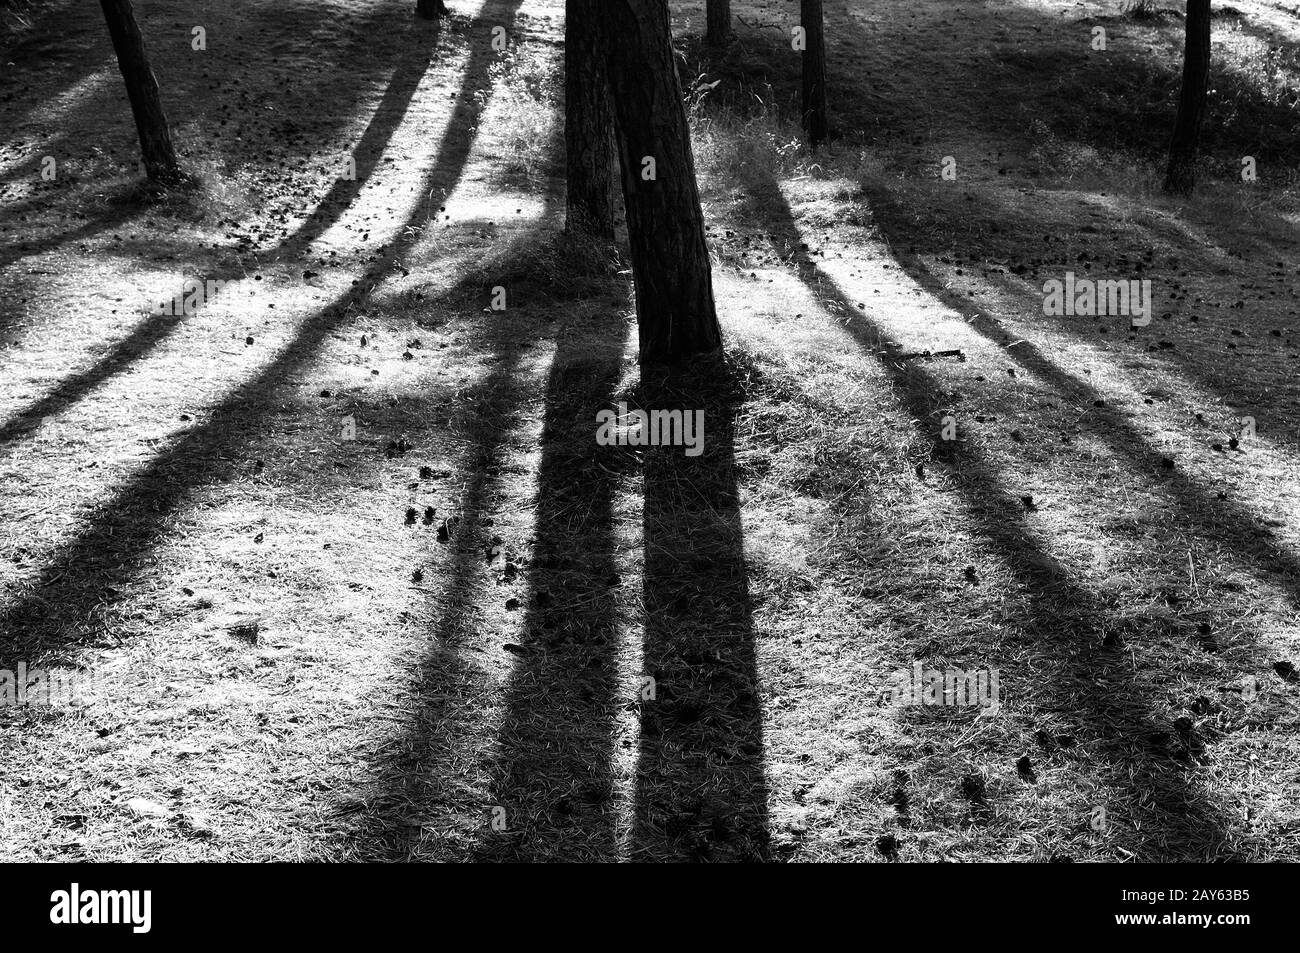 the long shadows in the pine forest in black and white Stock Photo